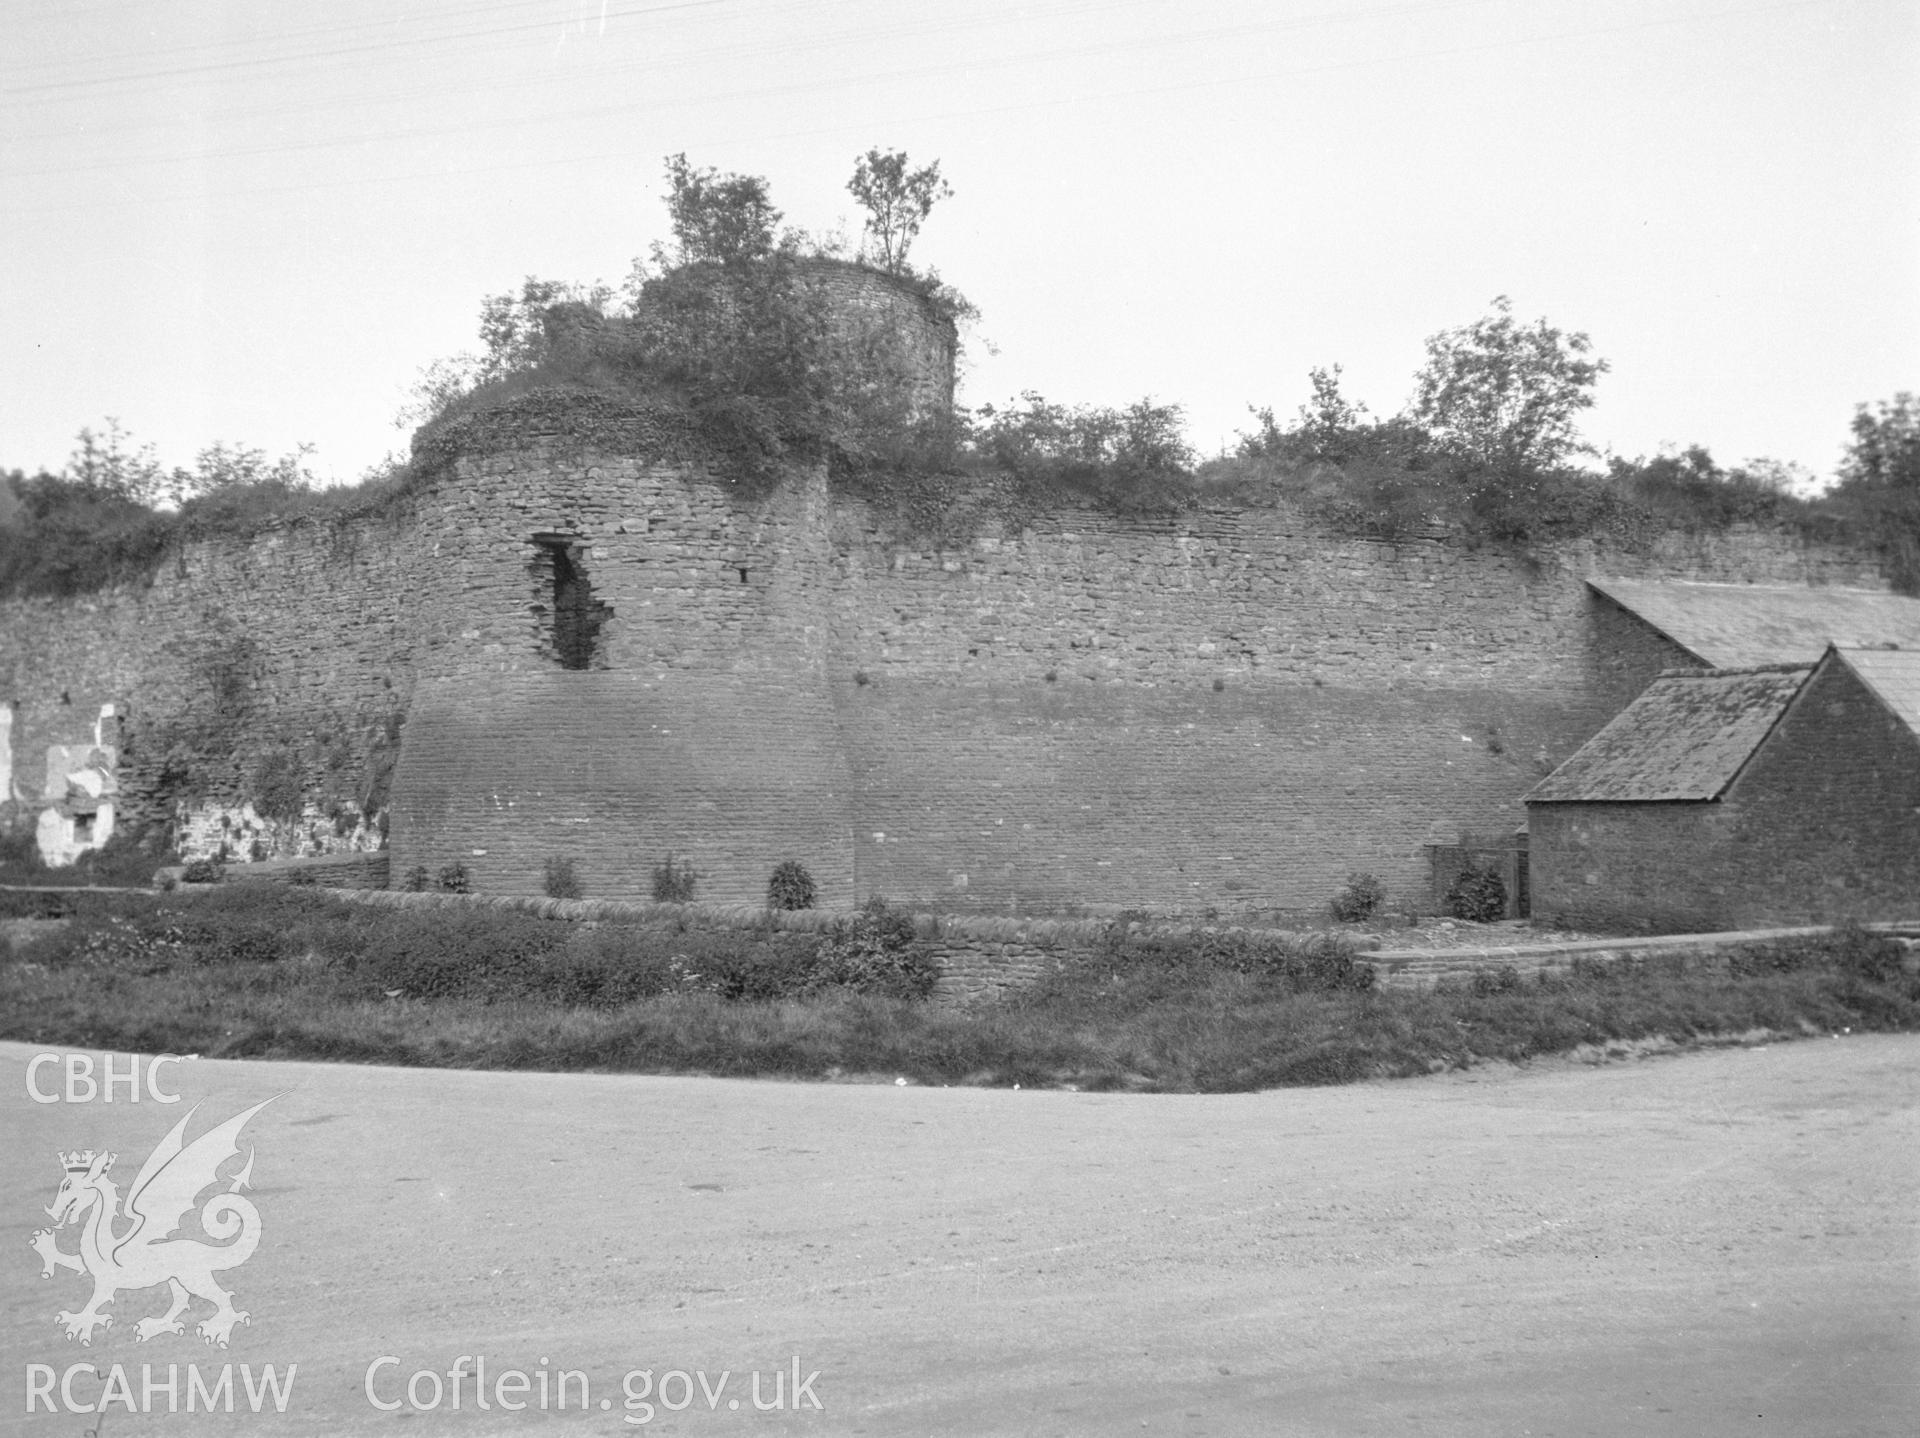 Digital copy of a nitrate negative showing exterior view of top of circular keep and bastion tower, Skenfrith Castle, taken circa 1934. From the National Building Record Postcard Collection.